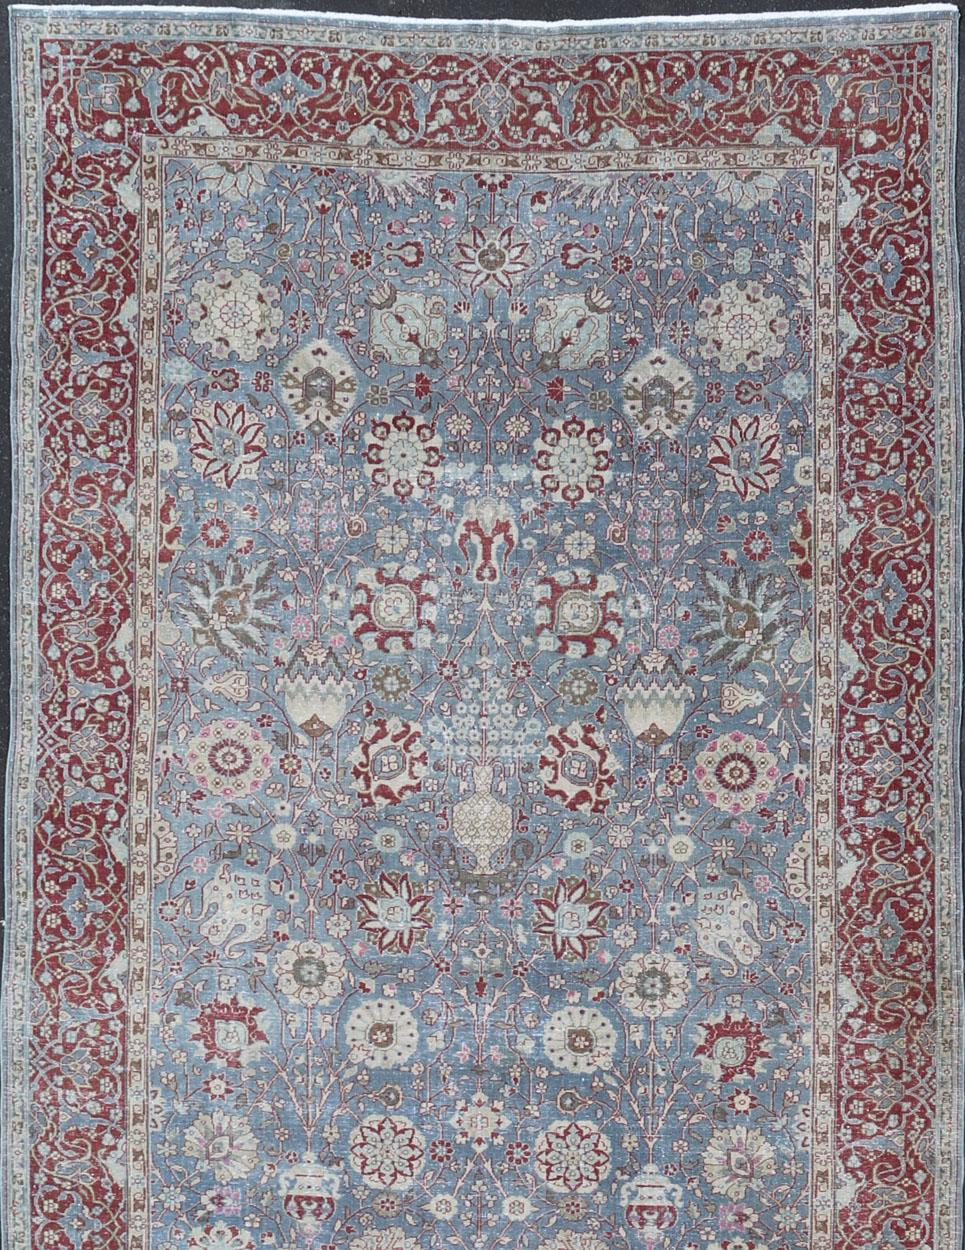 Very large gallery Floral Turkish carpet from Turkey, rug R20-1006, country of origin / type: Turkey / Oushak, circa 1930, large gallery runner, large galley rug, long gallery

This very large Turkish gallery rug features a variety of blue and an